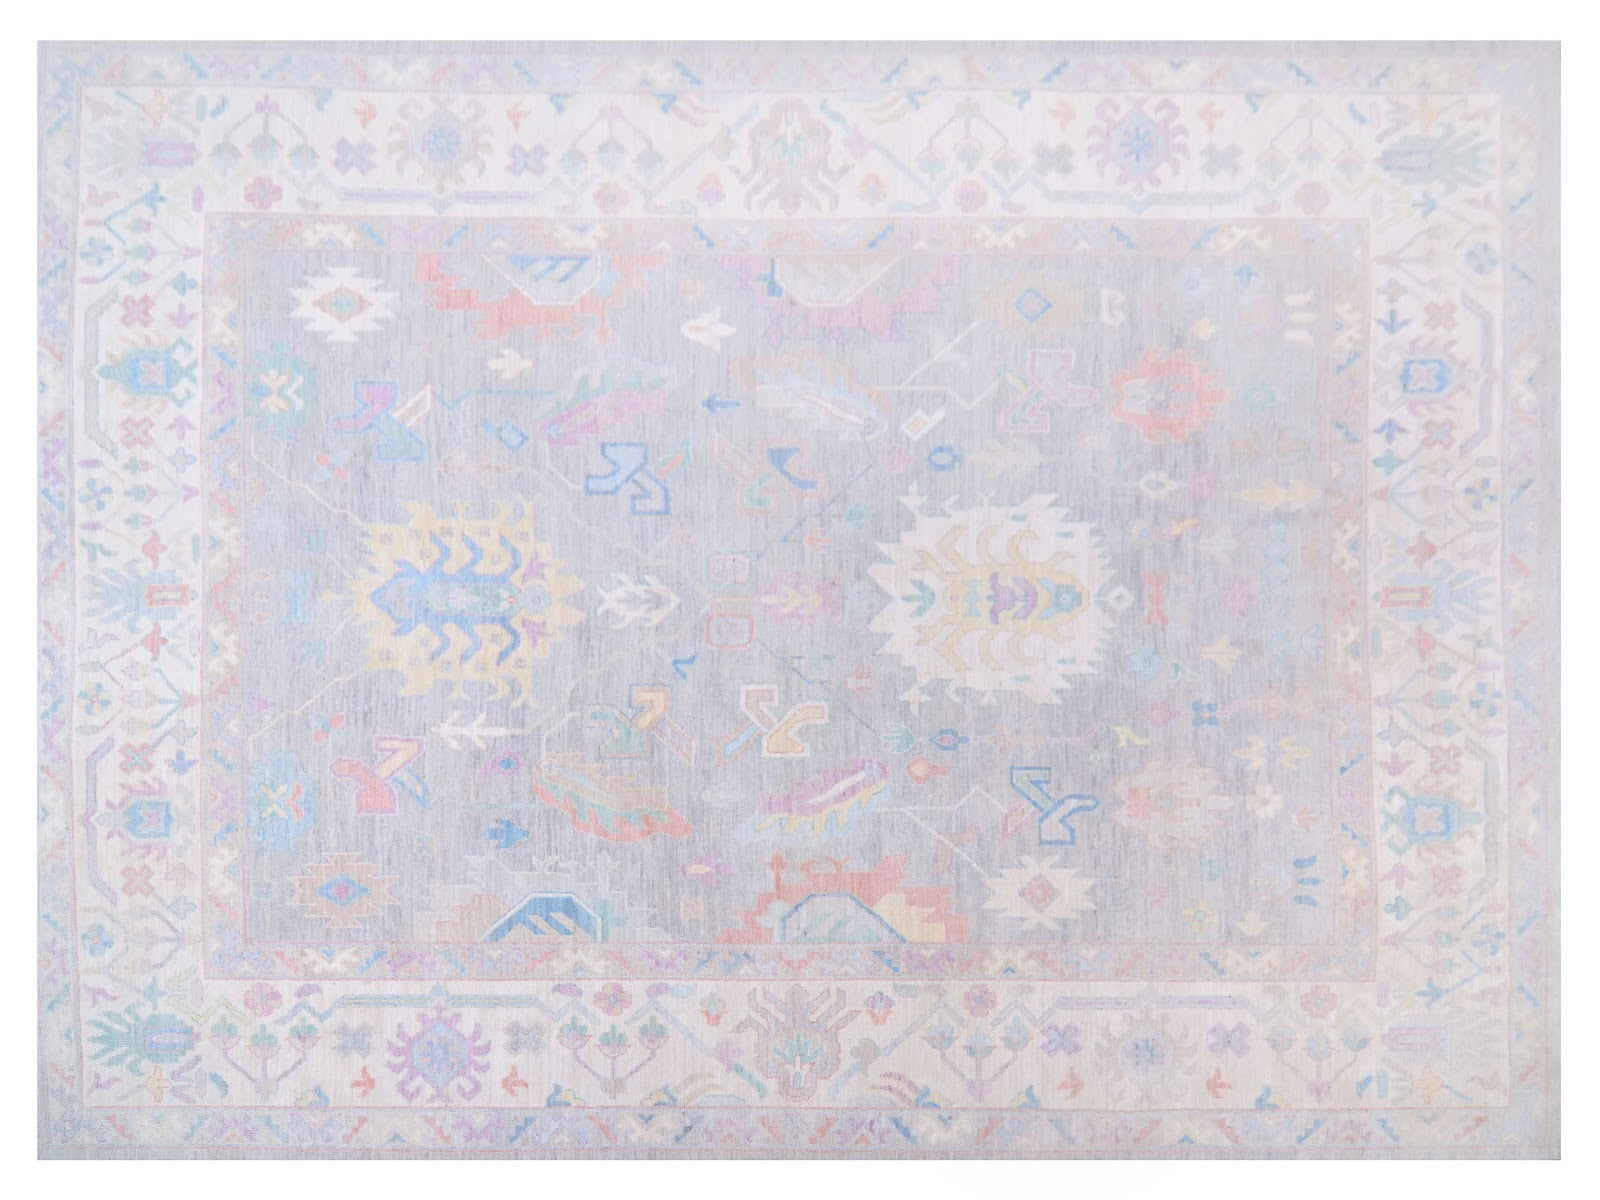 Exquisite Turkish Oushak rug with a light gray base, adorned with vibrant multicolor motifs